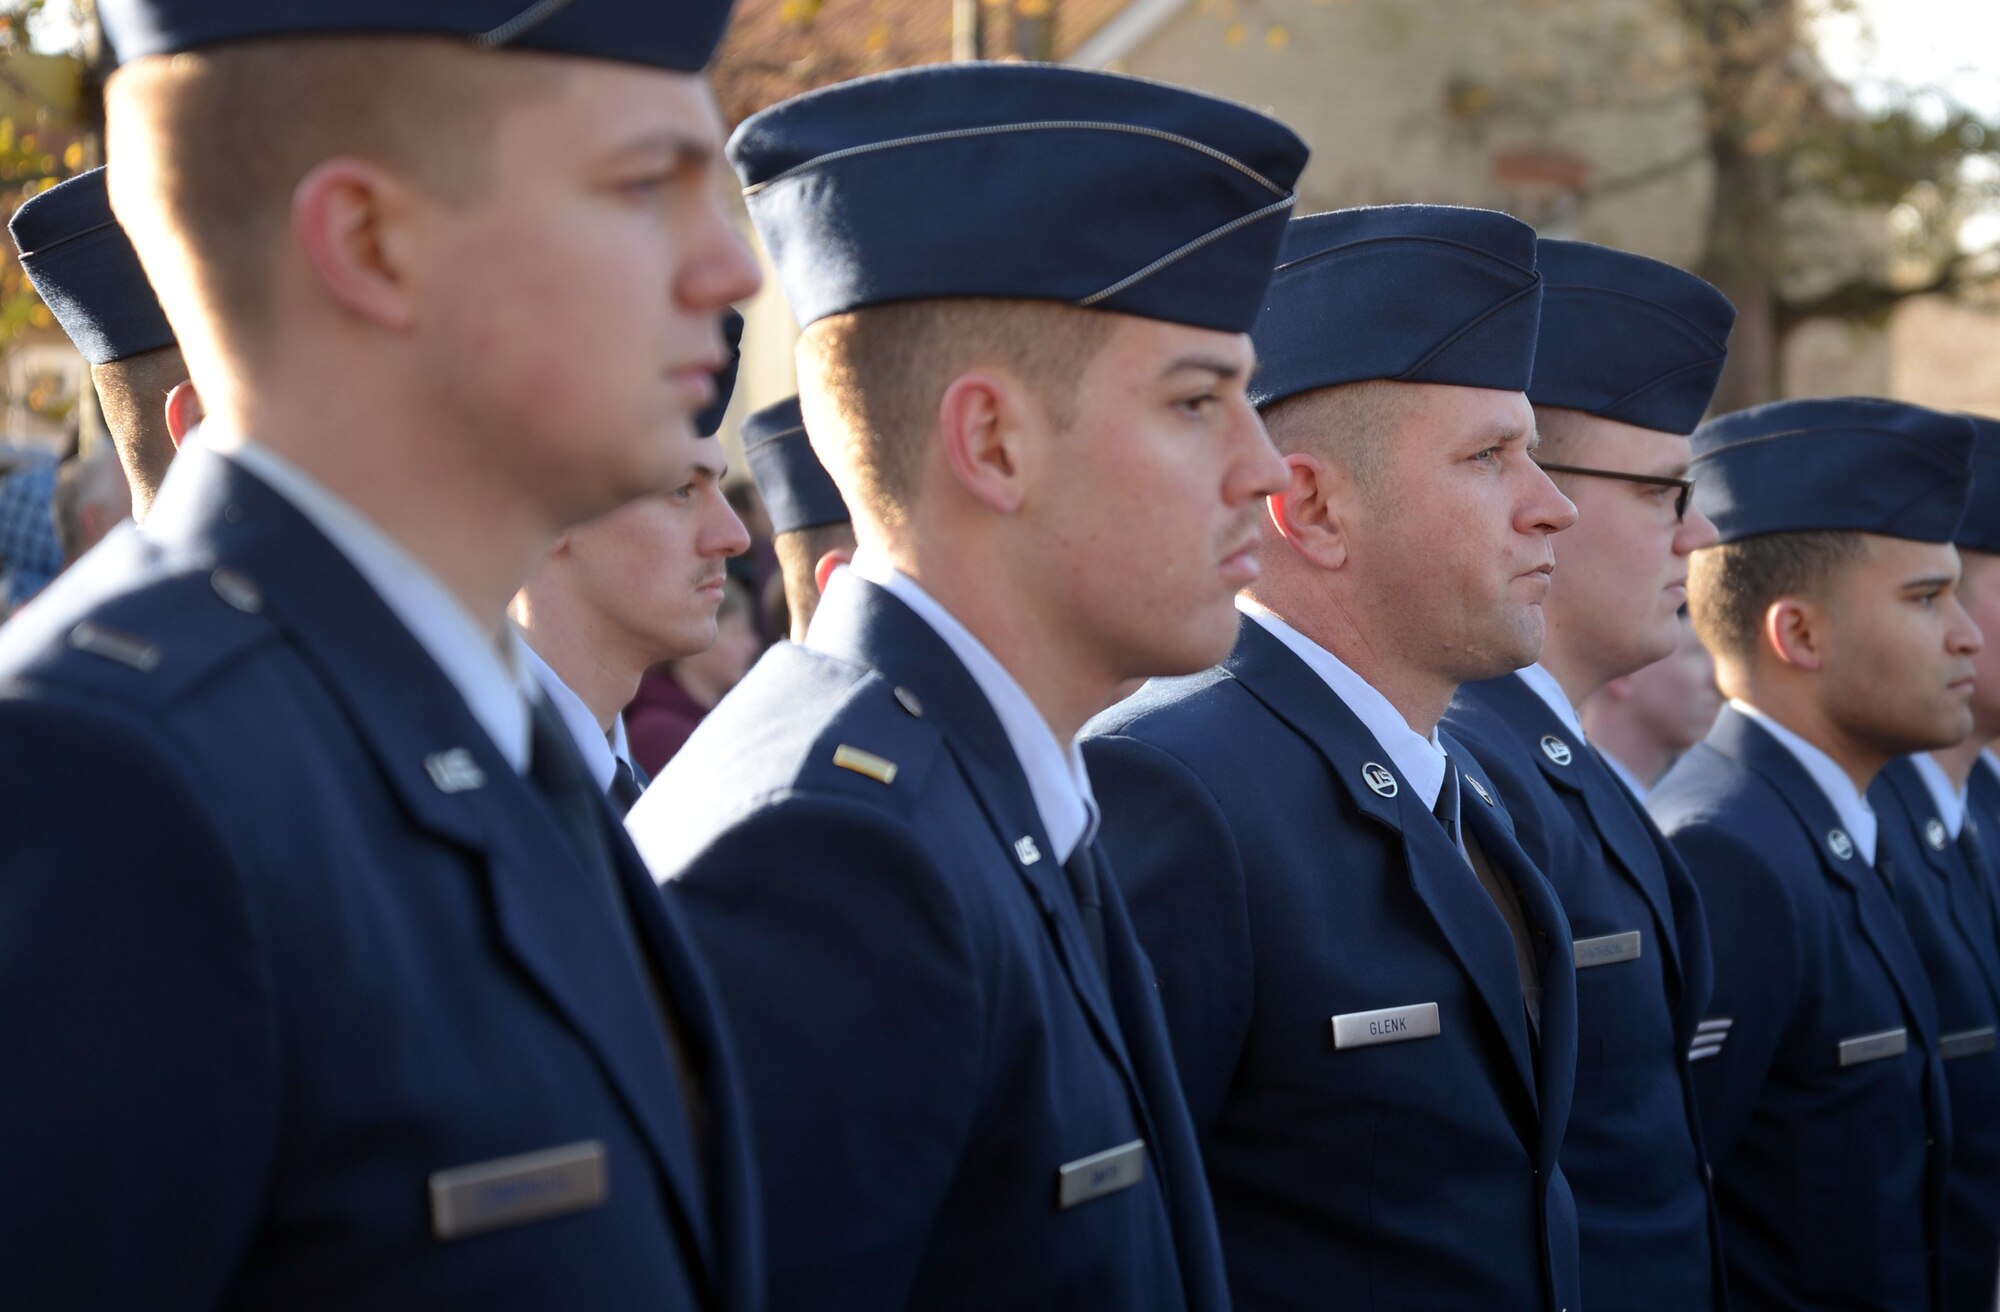 U.S. Airmen from the 100th Air Refueling Wing stand in formation during a Remembrance Day ceremony in Mildenhall, England, Nov. 12, 2017. Airmen, civic leaders, military cadets and others gathered to honor members of the armed services who have died in the line of duty. (U.S. Air Force photo by Airman 1st Class Benjamin Cooper)